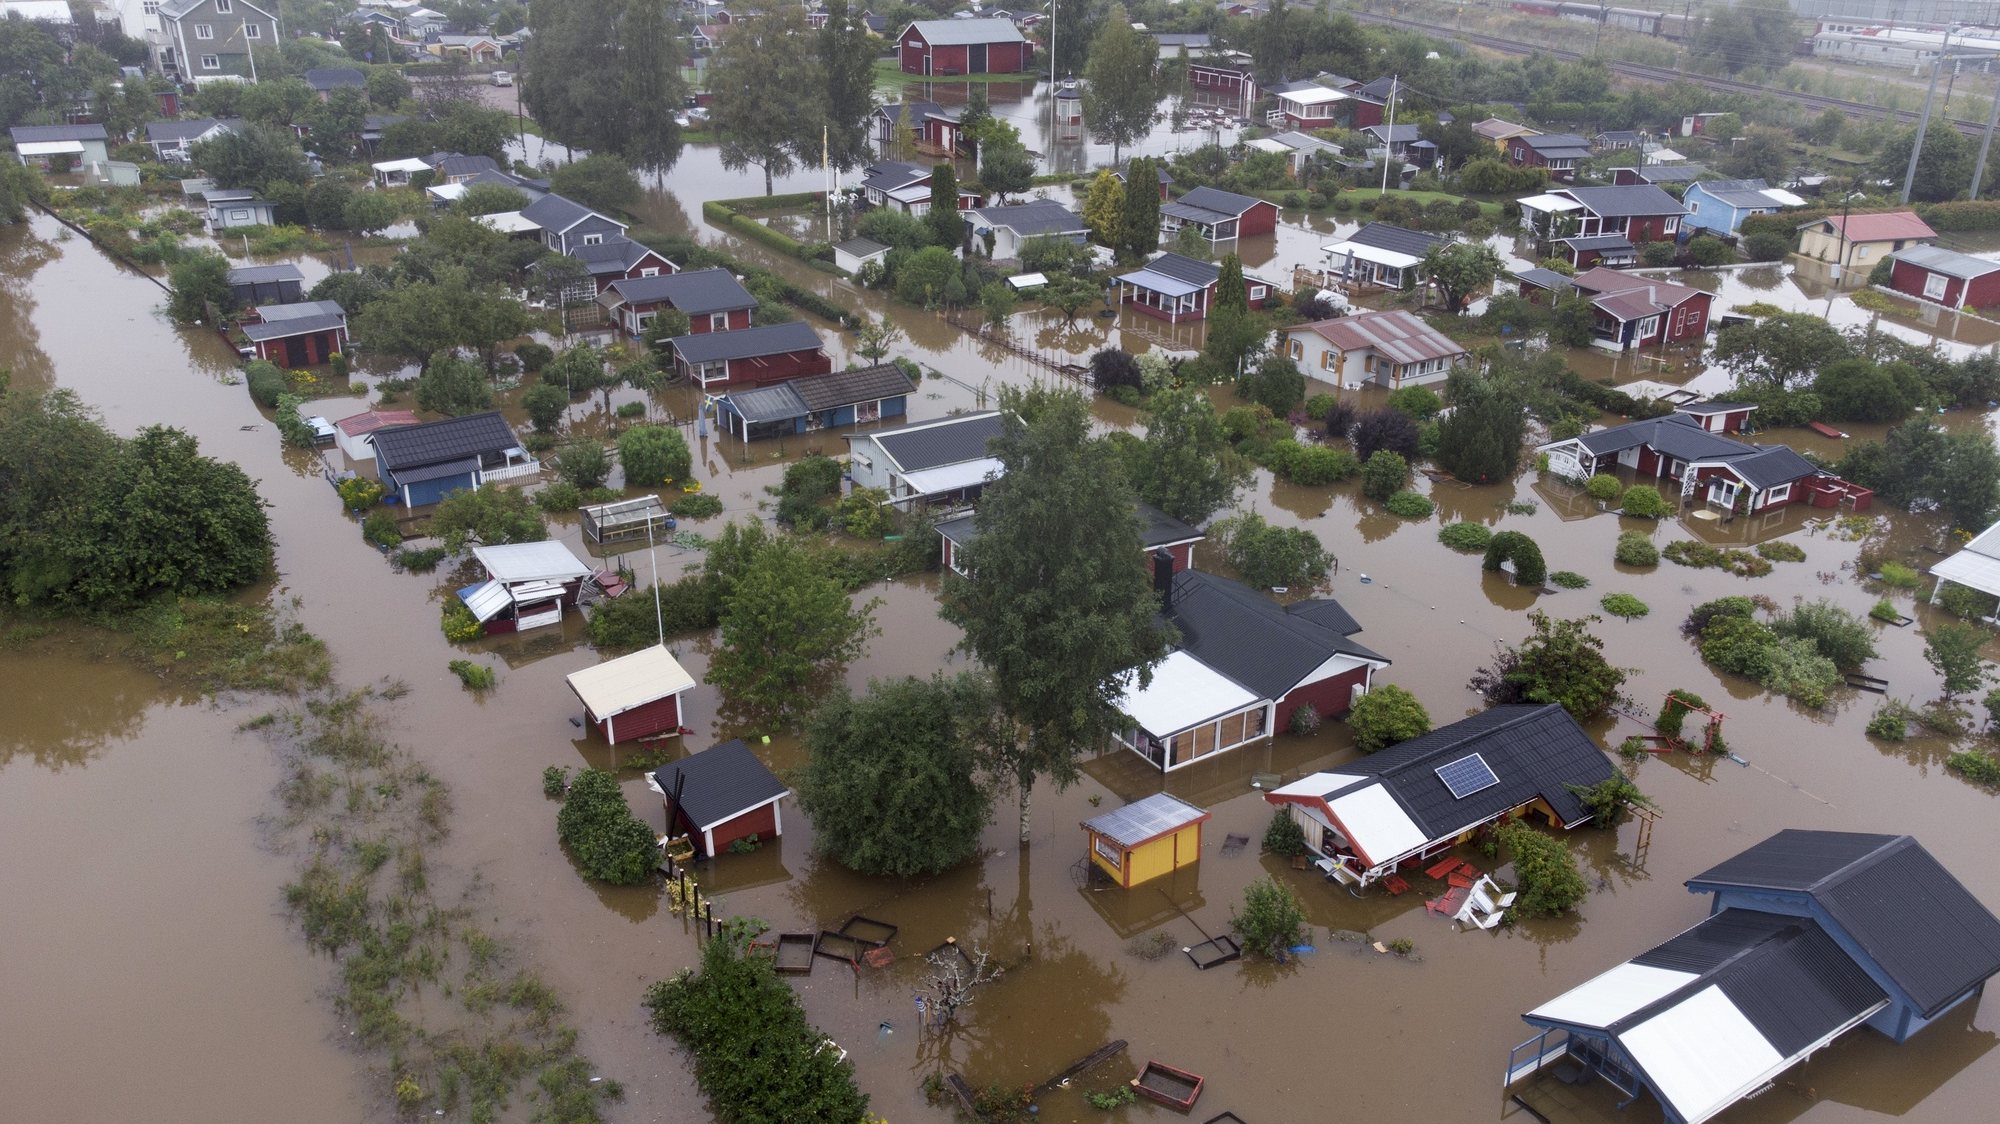 epa09418718 An aerial view over a flooded residential area at Sodra Kungsvagen in Gavle, Sweden, 18 August 2021. Due to heavy rains in eastern Sweden, several roads and viaducts are flooded.  EPA/Fredrik Sandberg  SWEDEN OUT